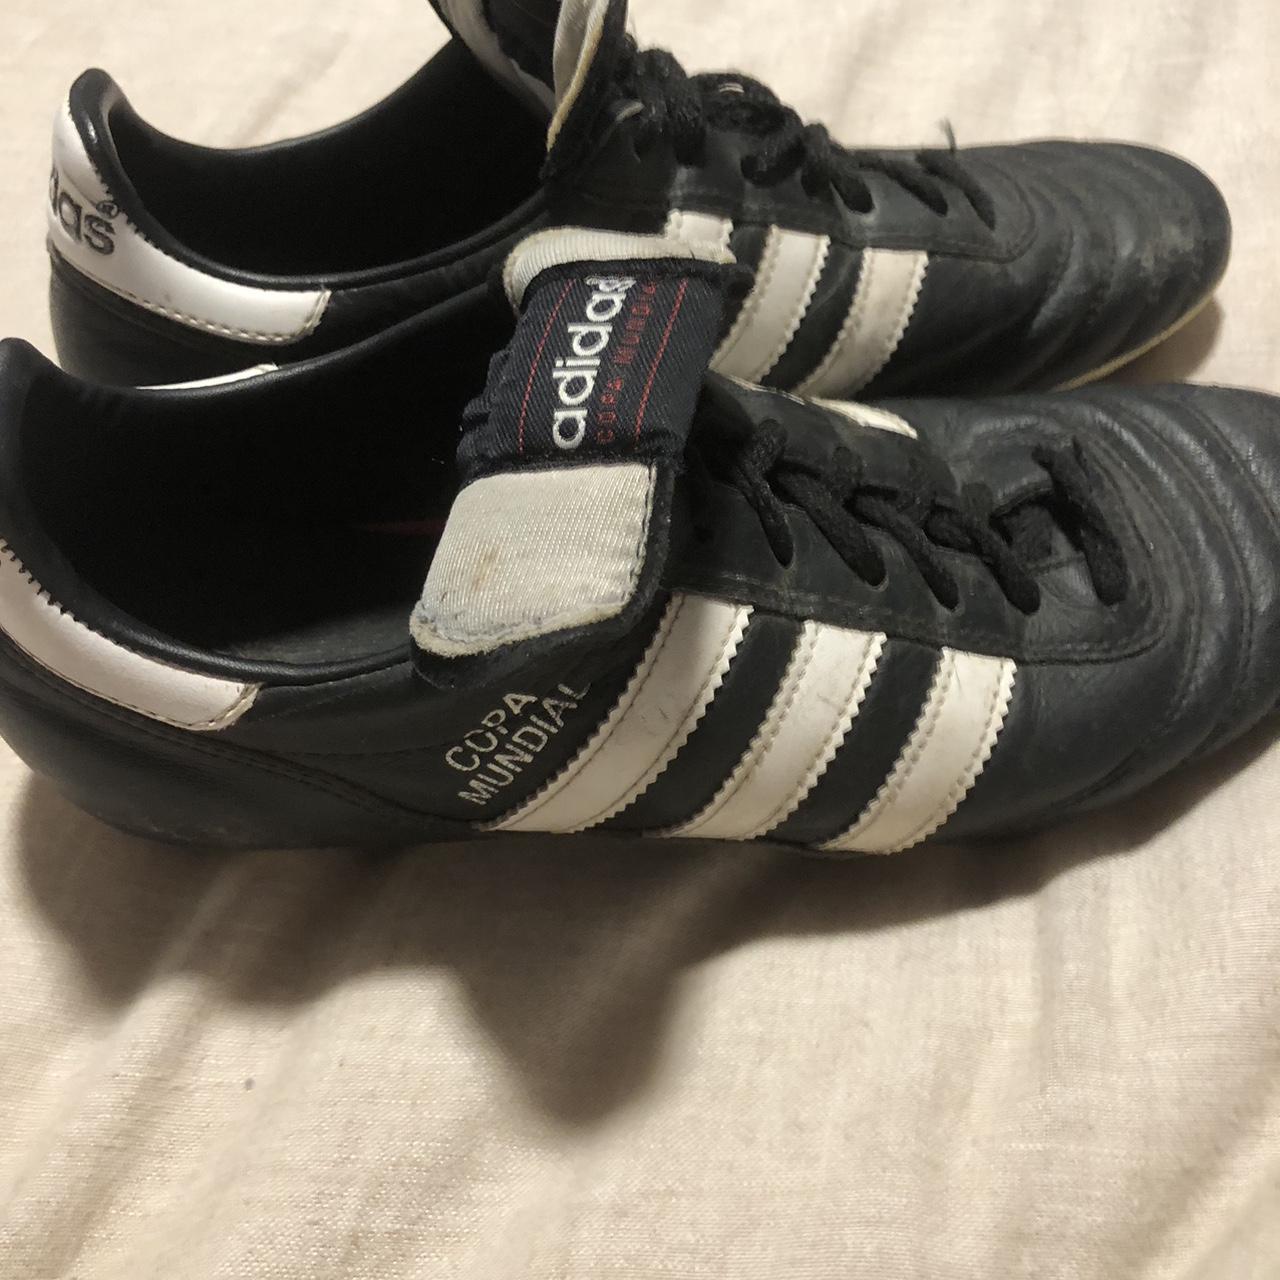 Adidas Men's Black and White Boots | Depop